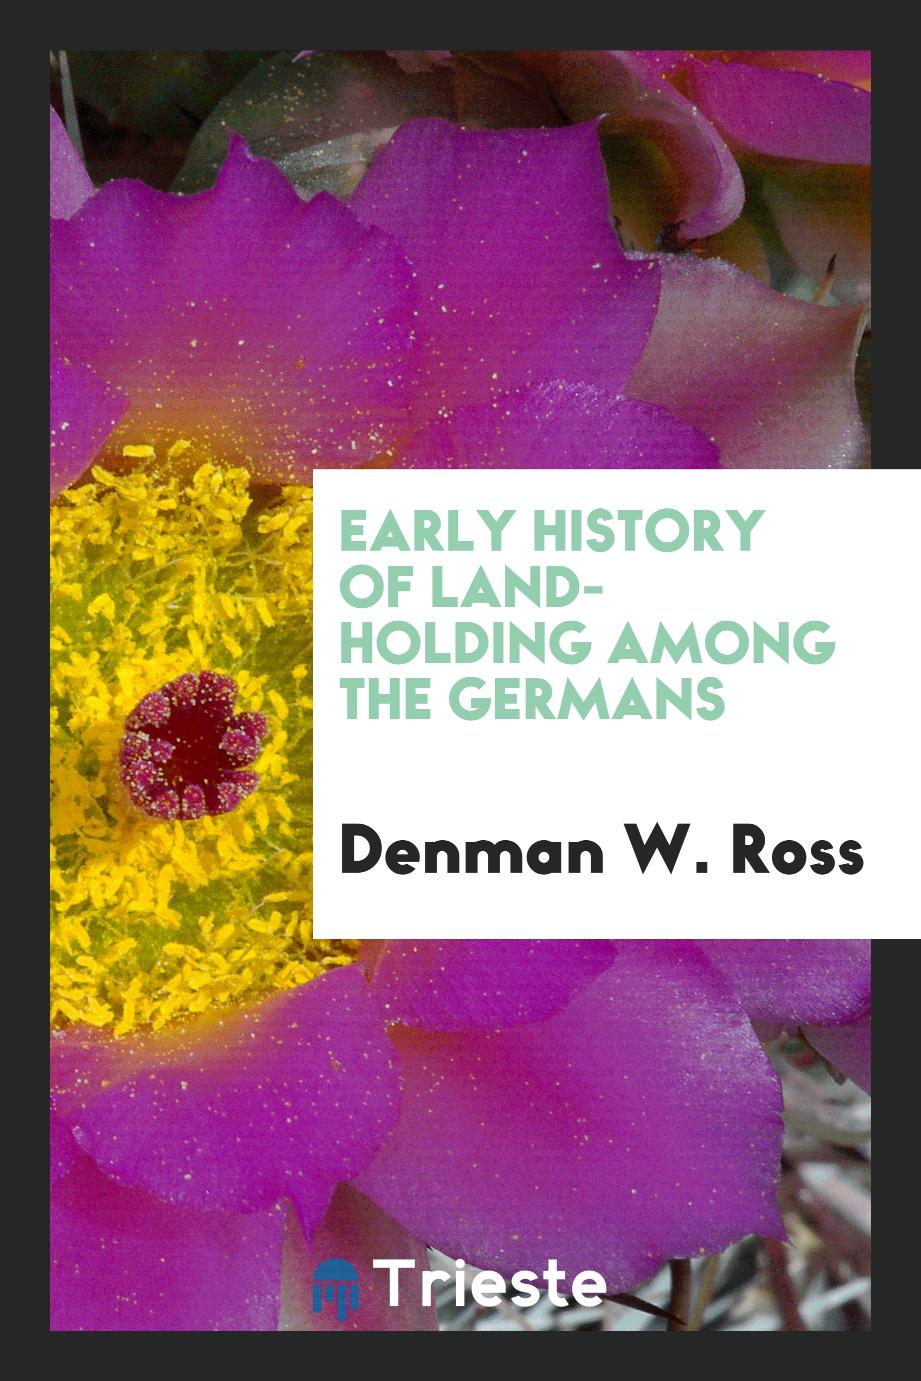 Early history of land-holding among the Germans